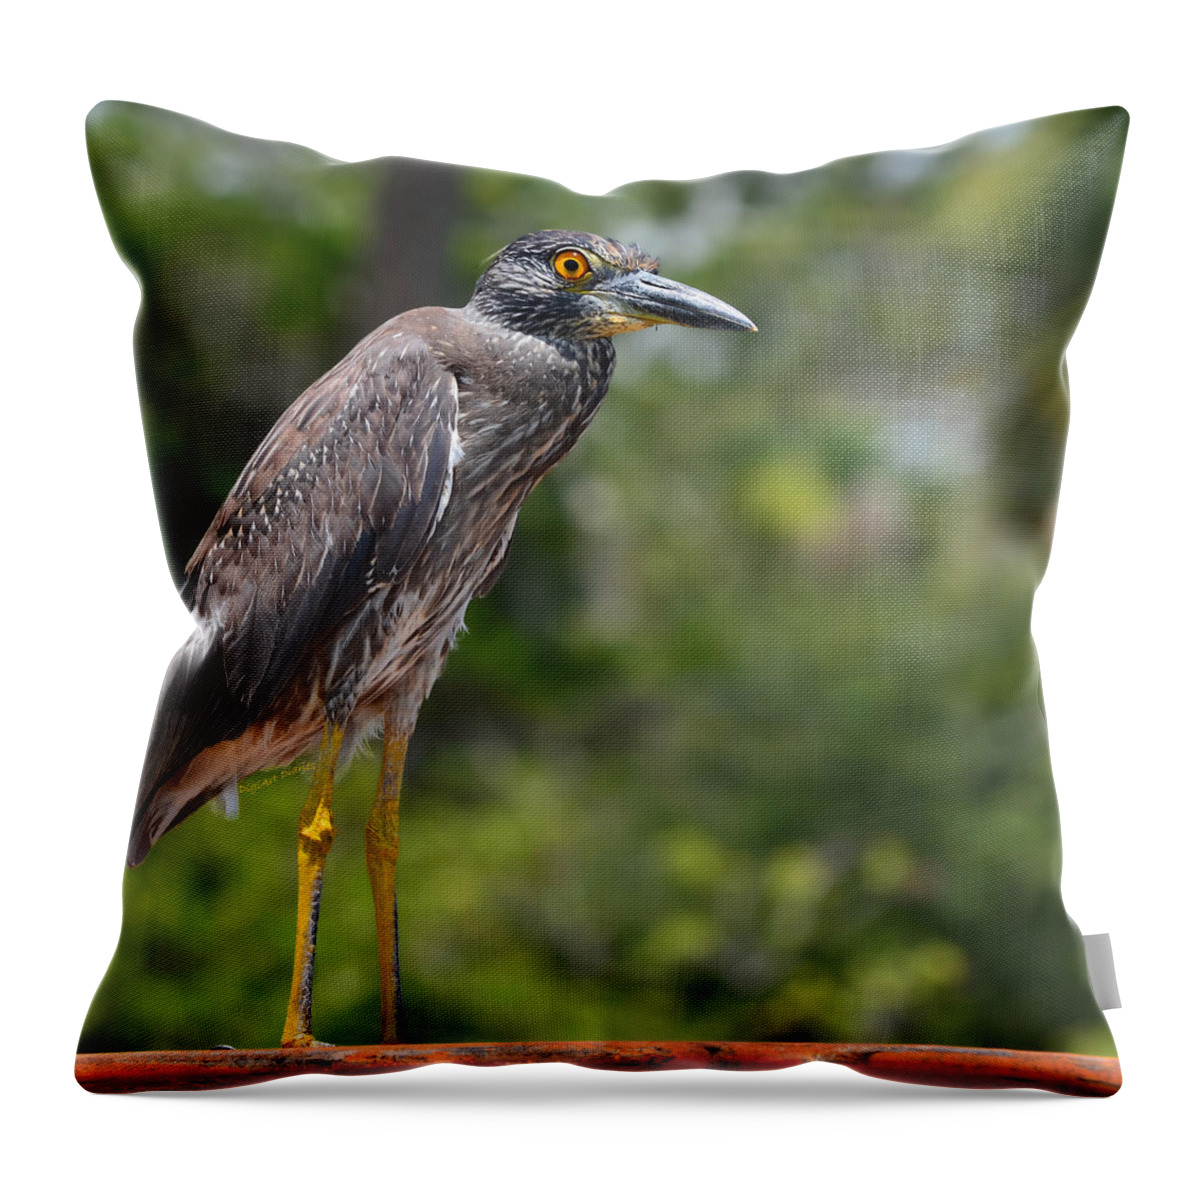 Heron Throw Pillow featuring the photograph Eye to Lens by DigiArt Diaries by Vicky B Fuller